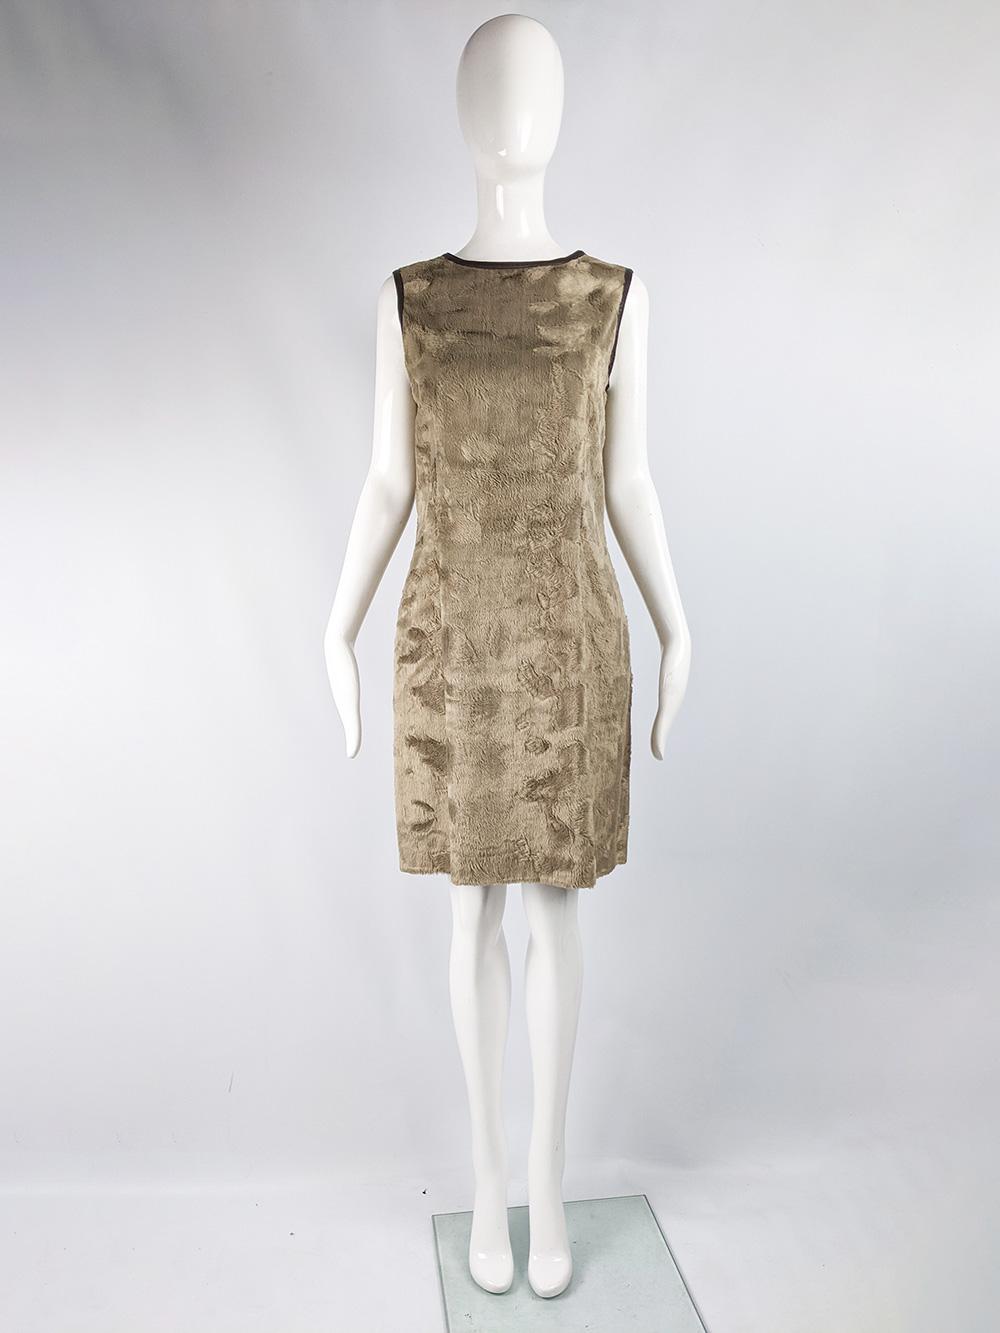 A fabulous vintage womens dress from the 90s by luxury fashion designer, Rifat Ozbek for the Future Ozbek line. In a short pile fake fur, which gives a 60s inspired feel which is furthered by the sleeveless, shift silhouette. Perfect for a party or